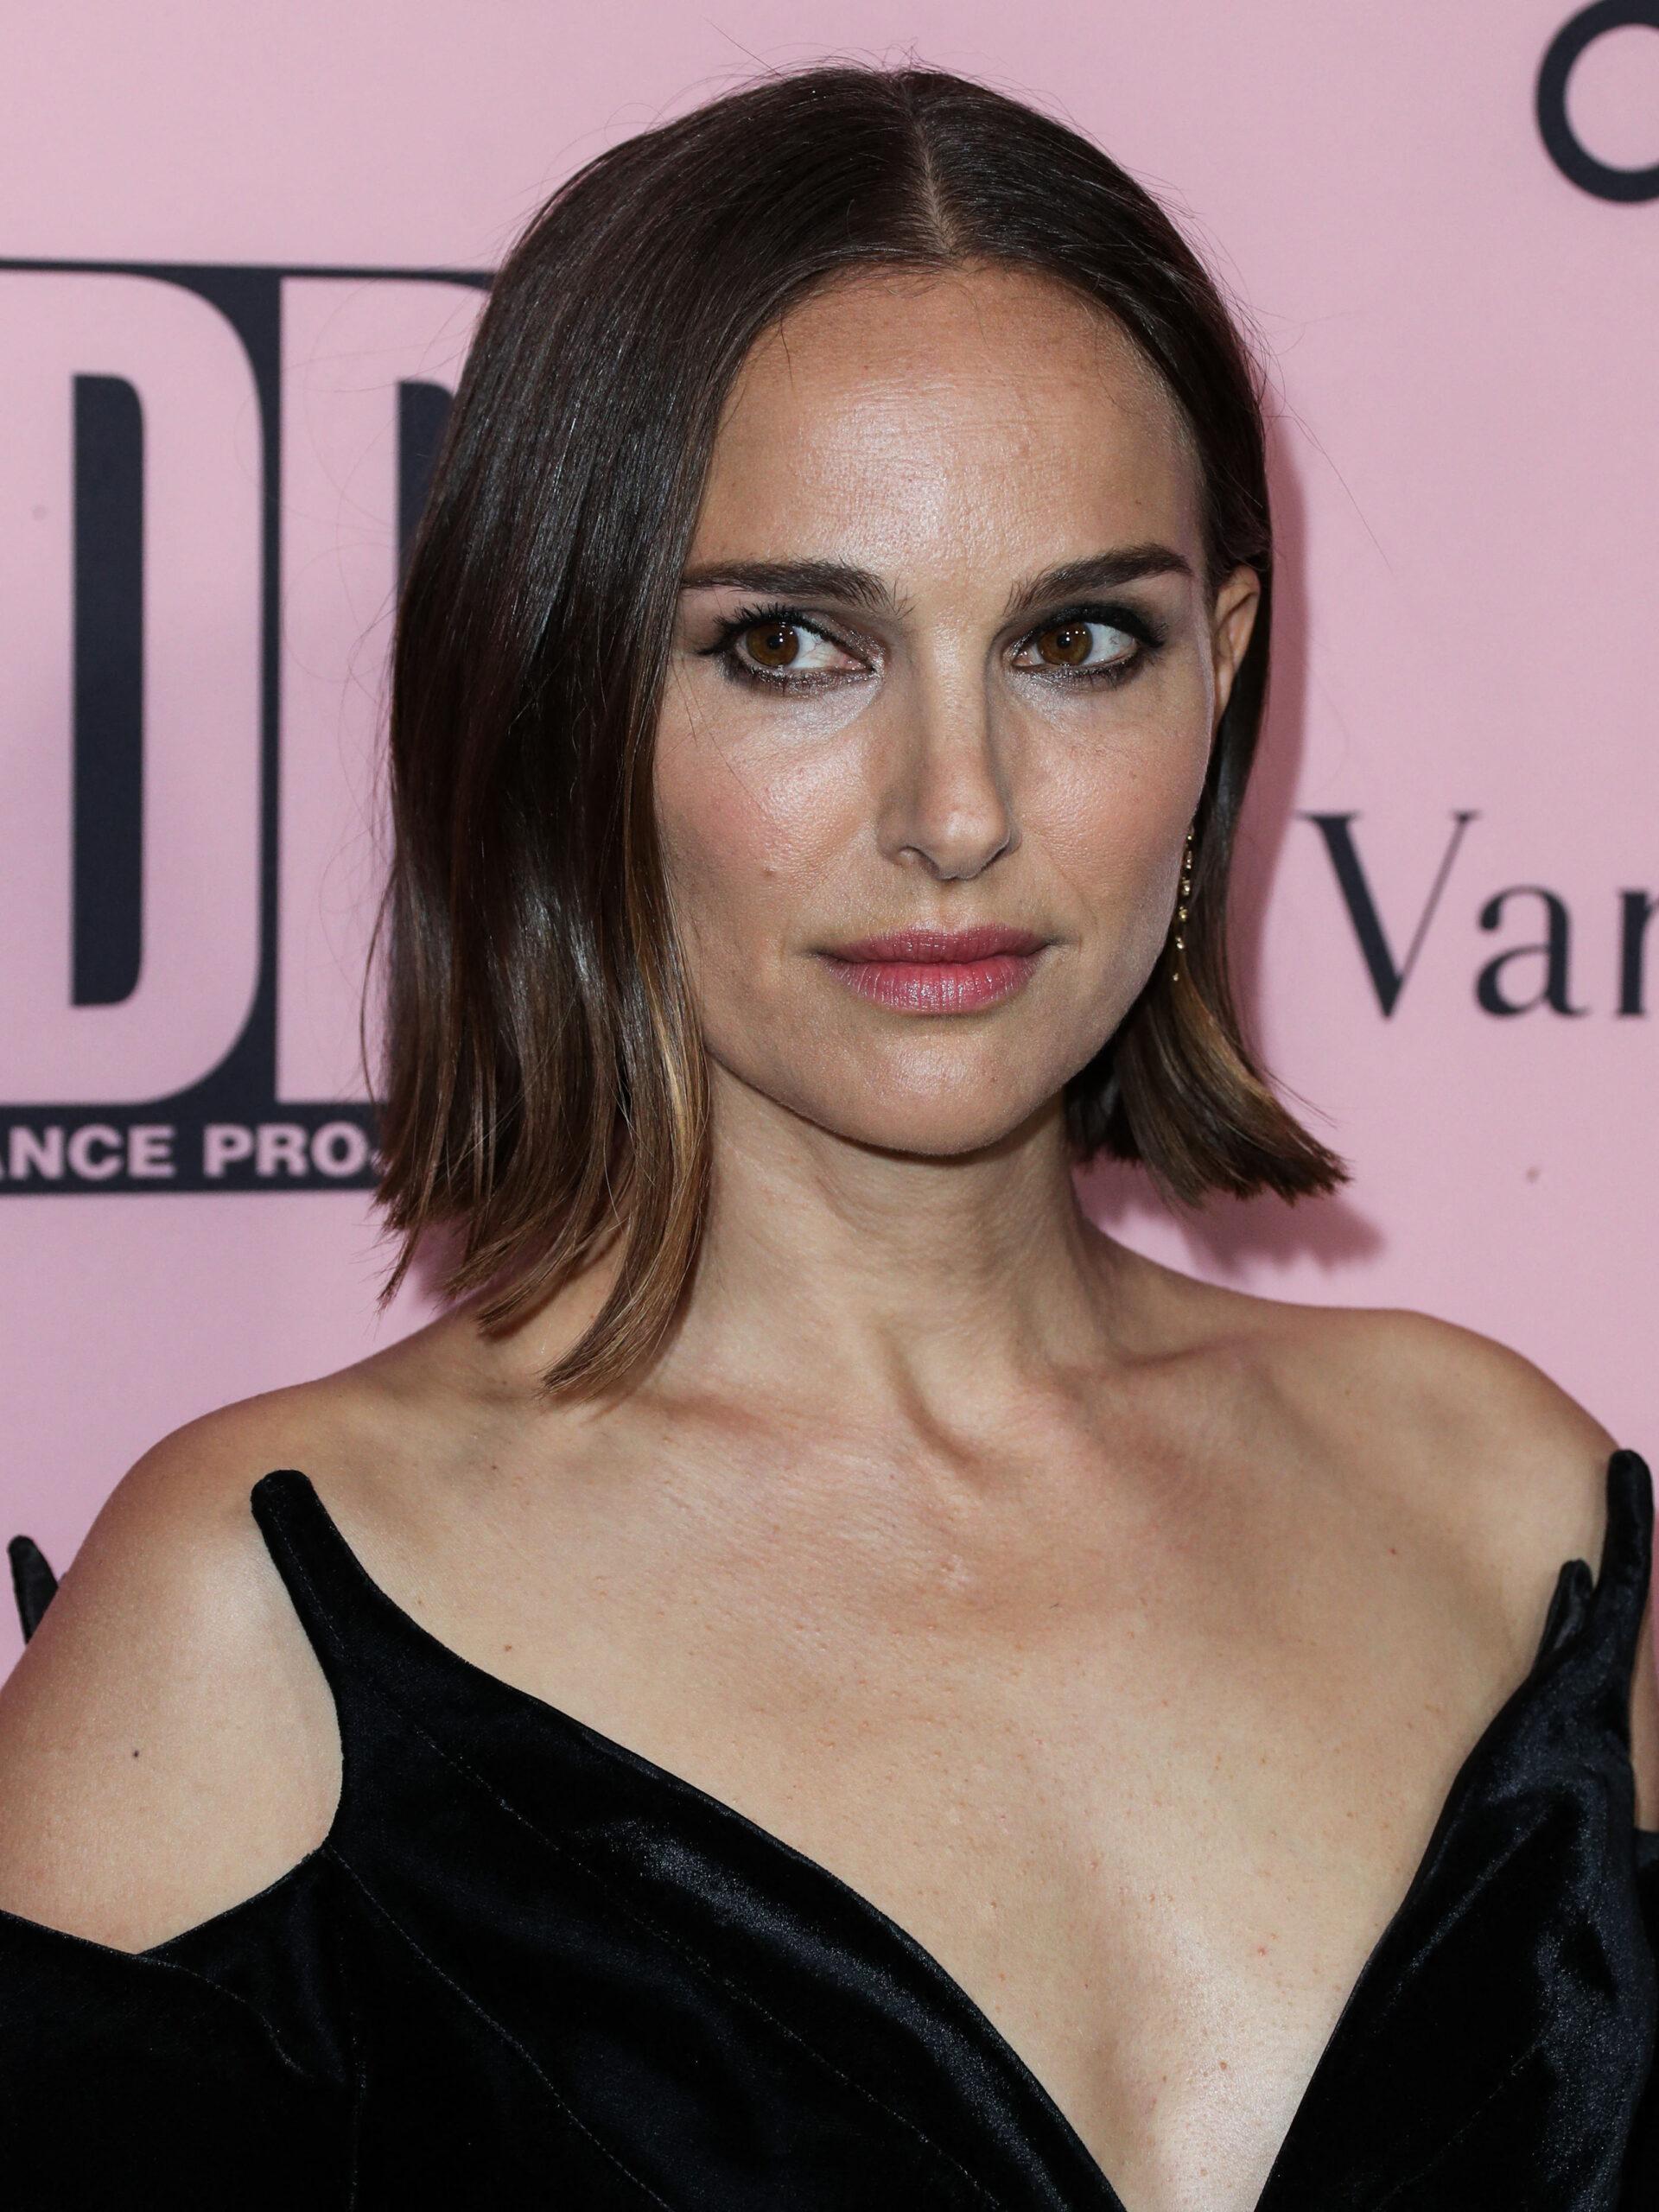 Natalie Portman Talks Living Green And Her Fashion Choices